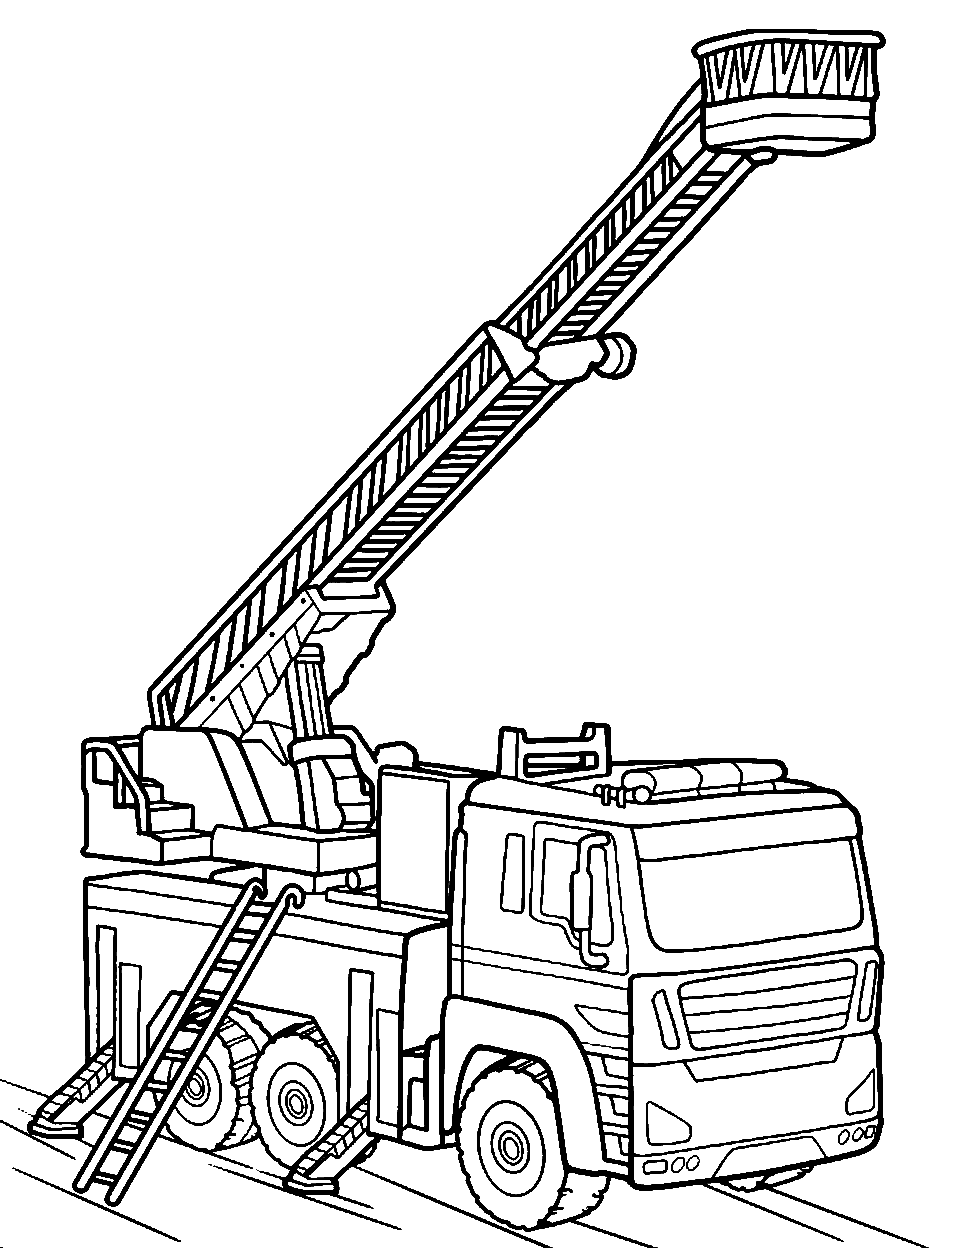 Pierce Fire Truck in Action Coloring Page - A modern Pierce fire truck with its ladder extended.